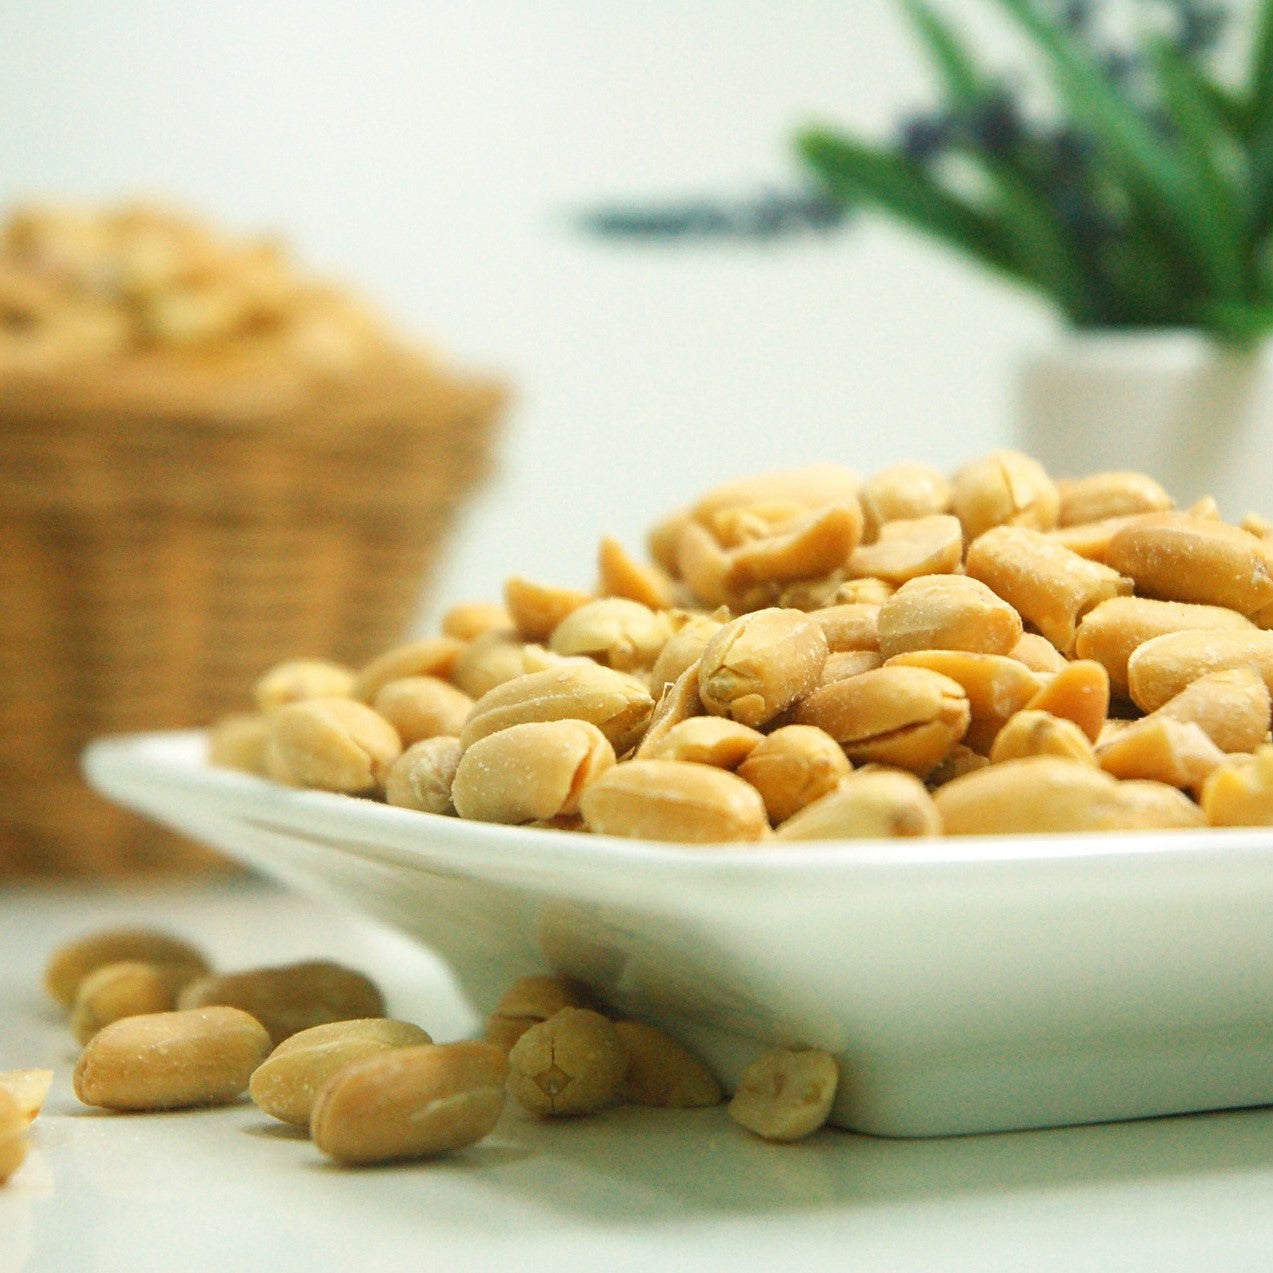 What are the Health Benefits of Peanuts?